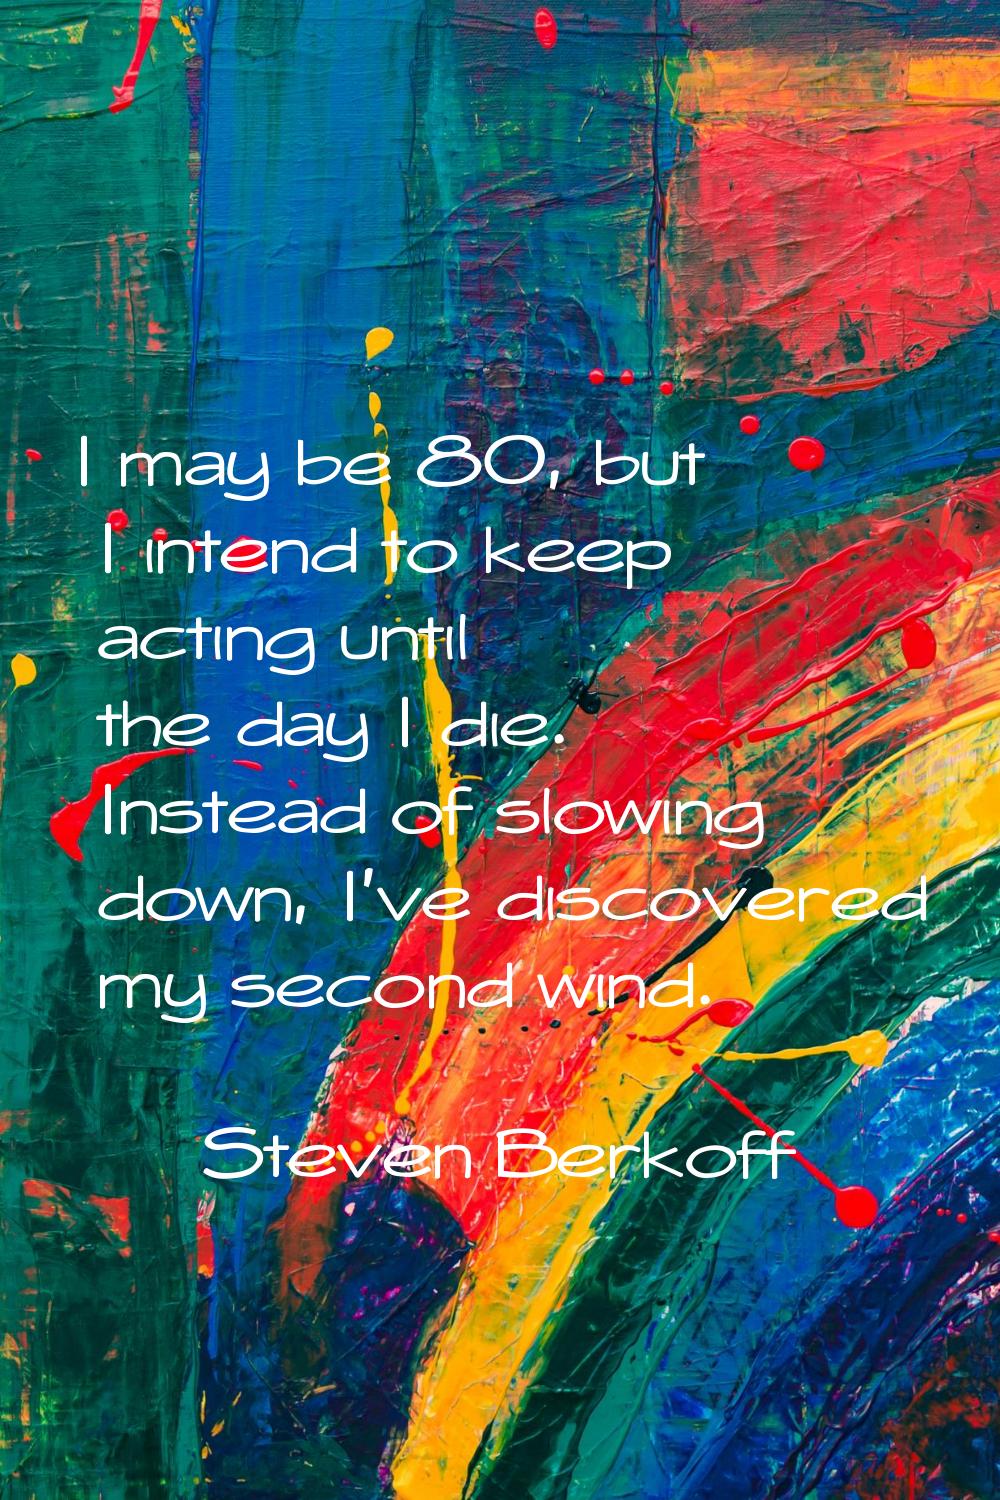 I may be 80, but I intend to keep acting until the day I die. Instead of slowing down, I've discove